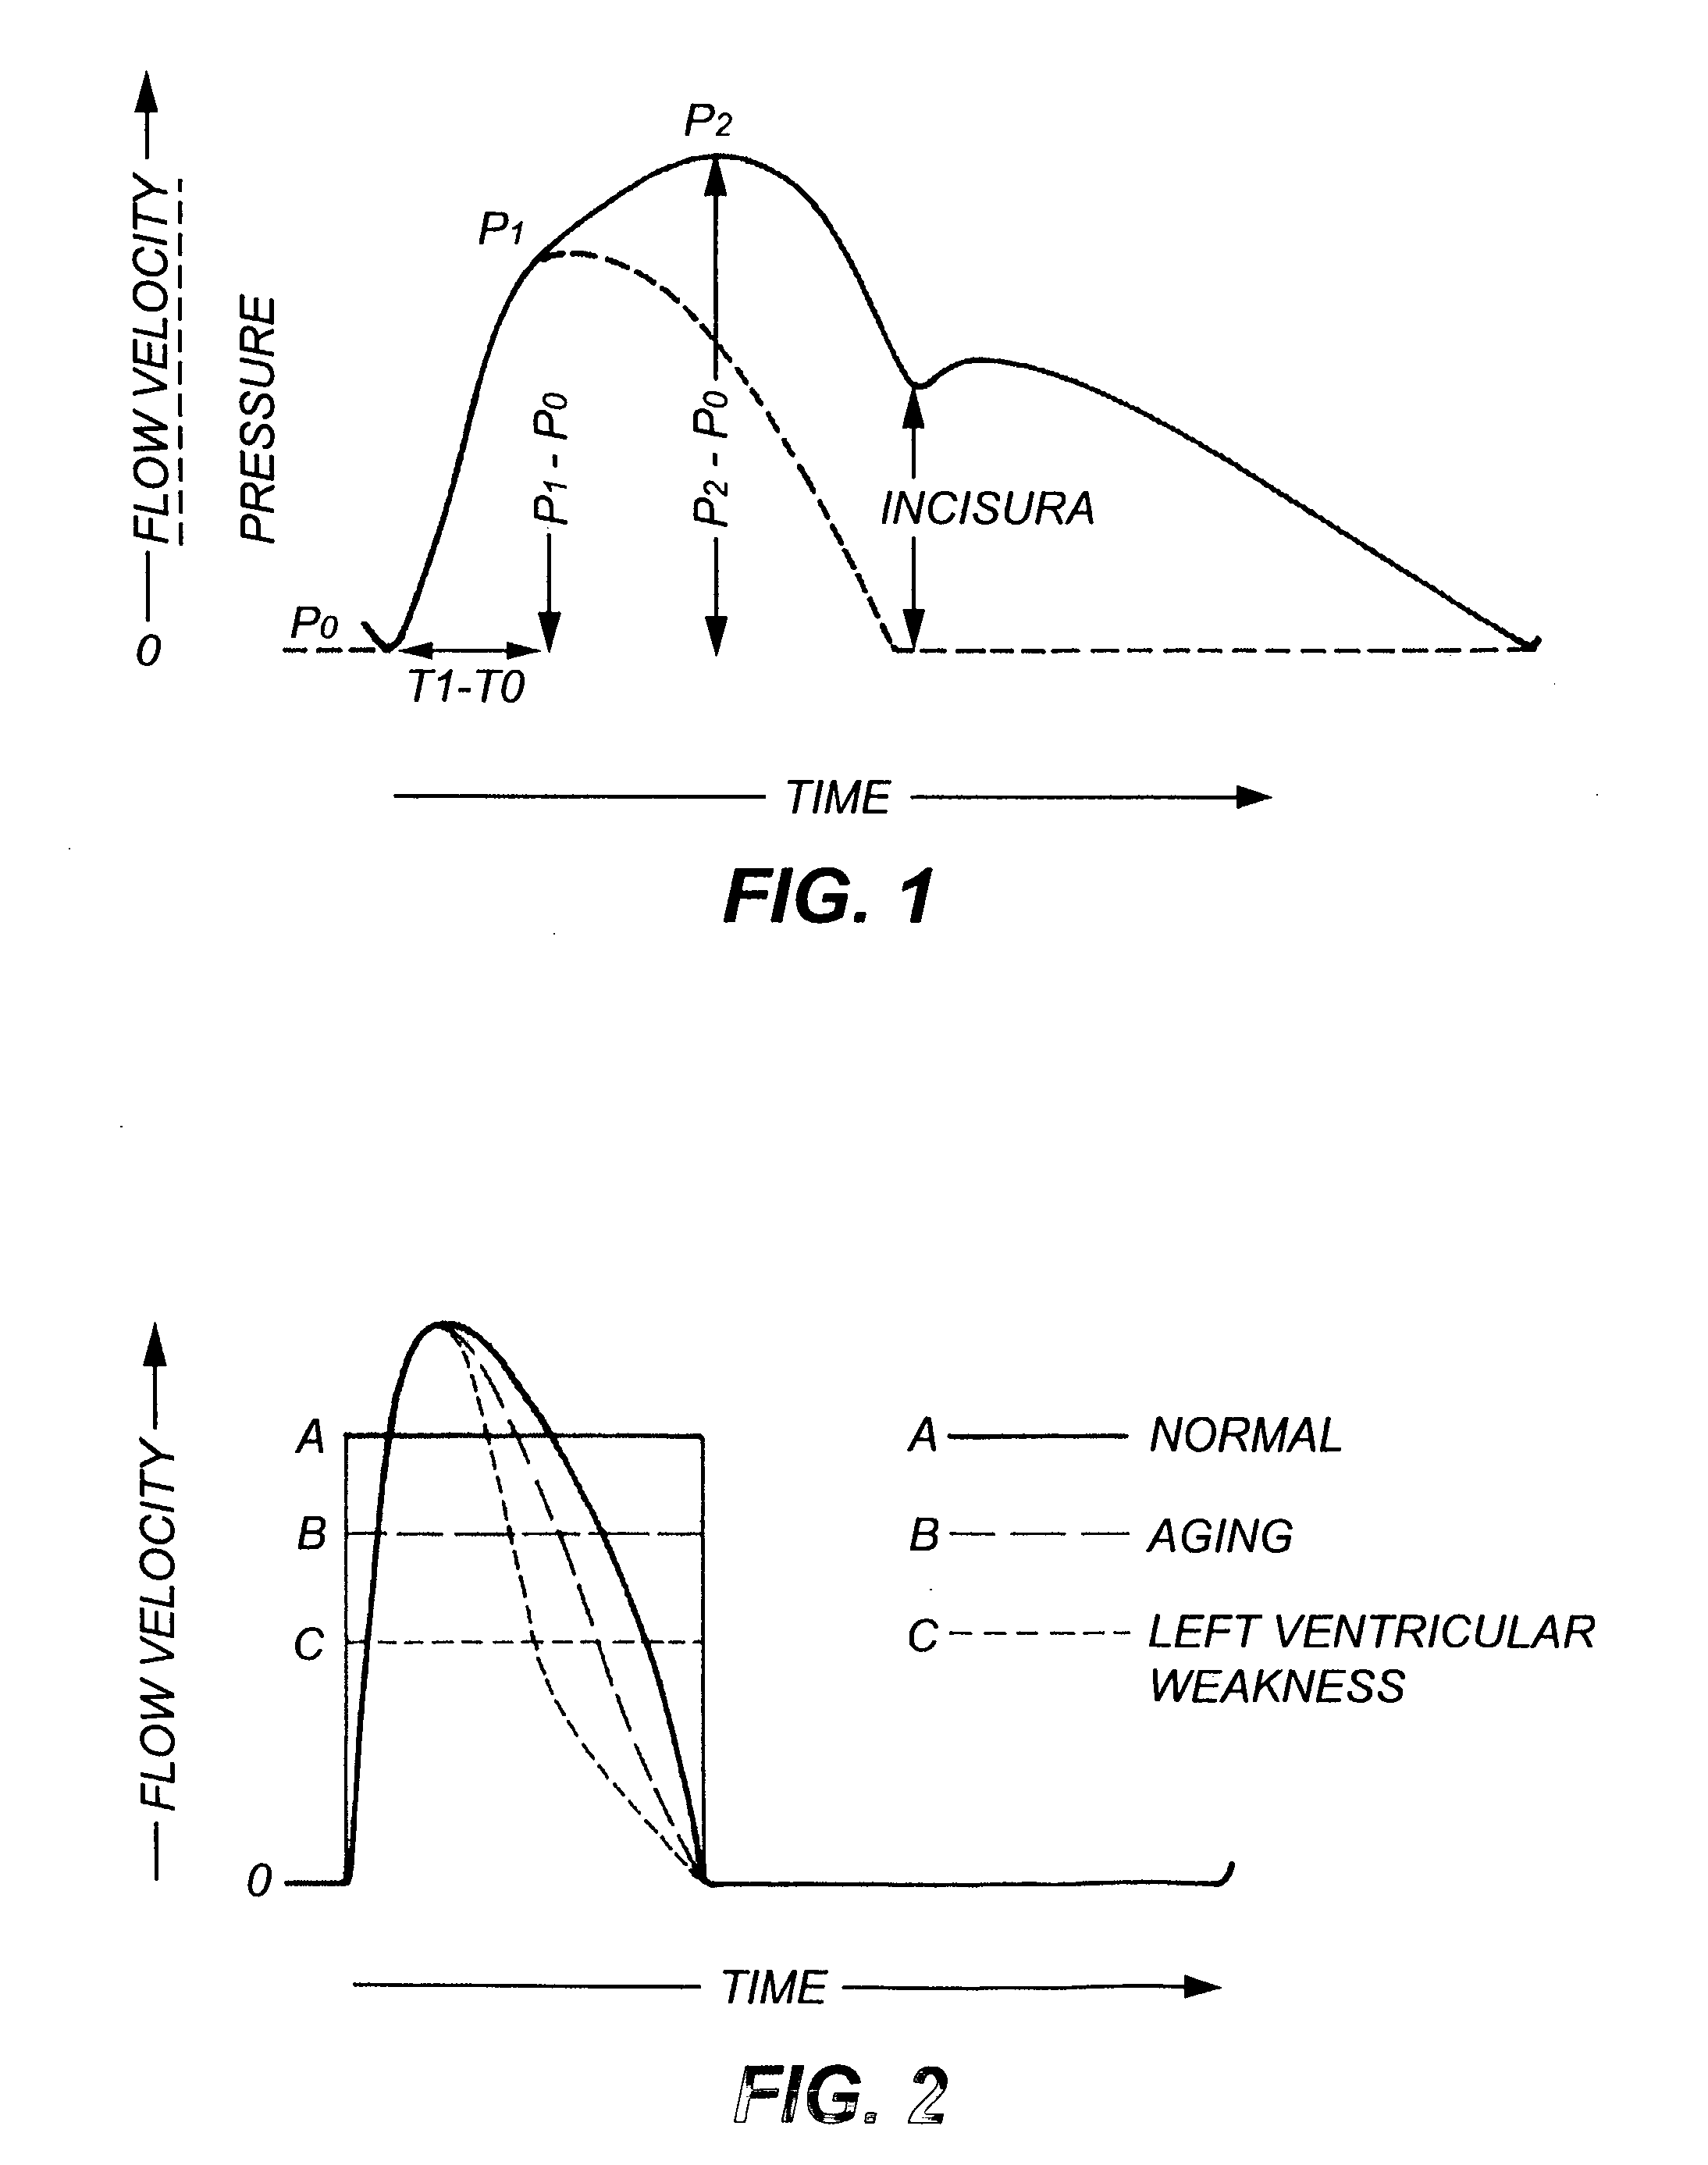 Method and apparatus for determination of cardiac output from the arterial pressure pulse waveform